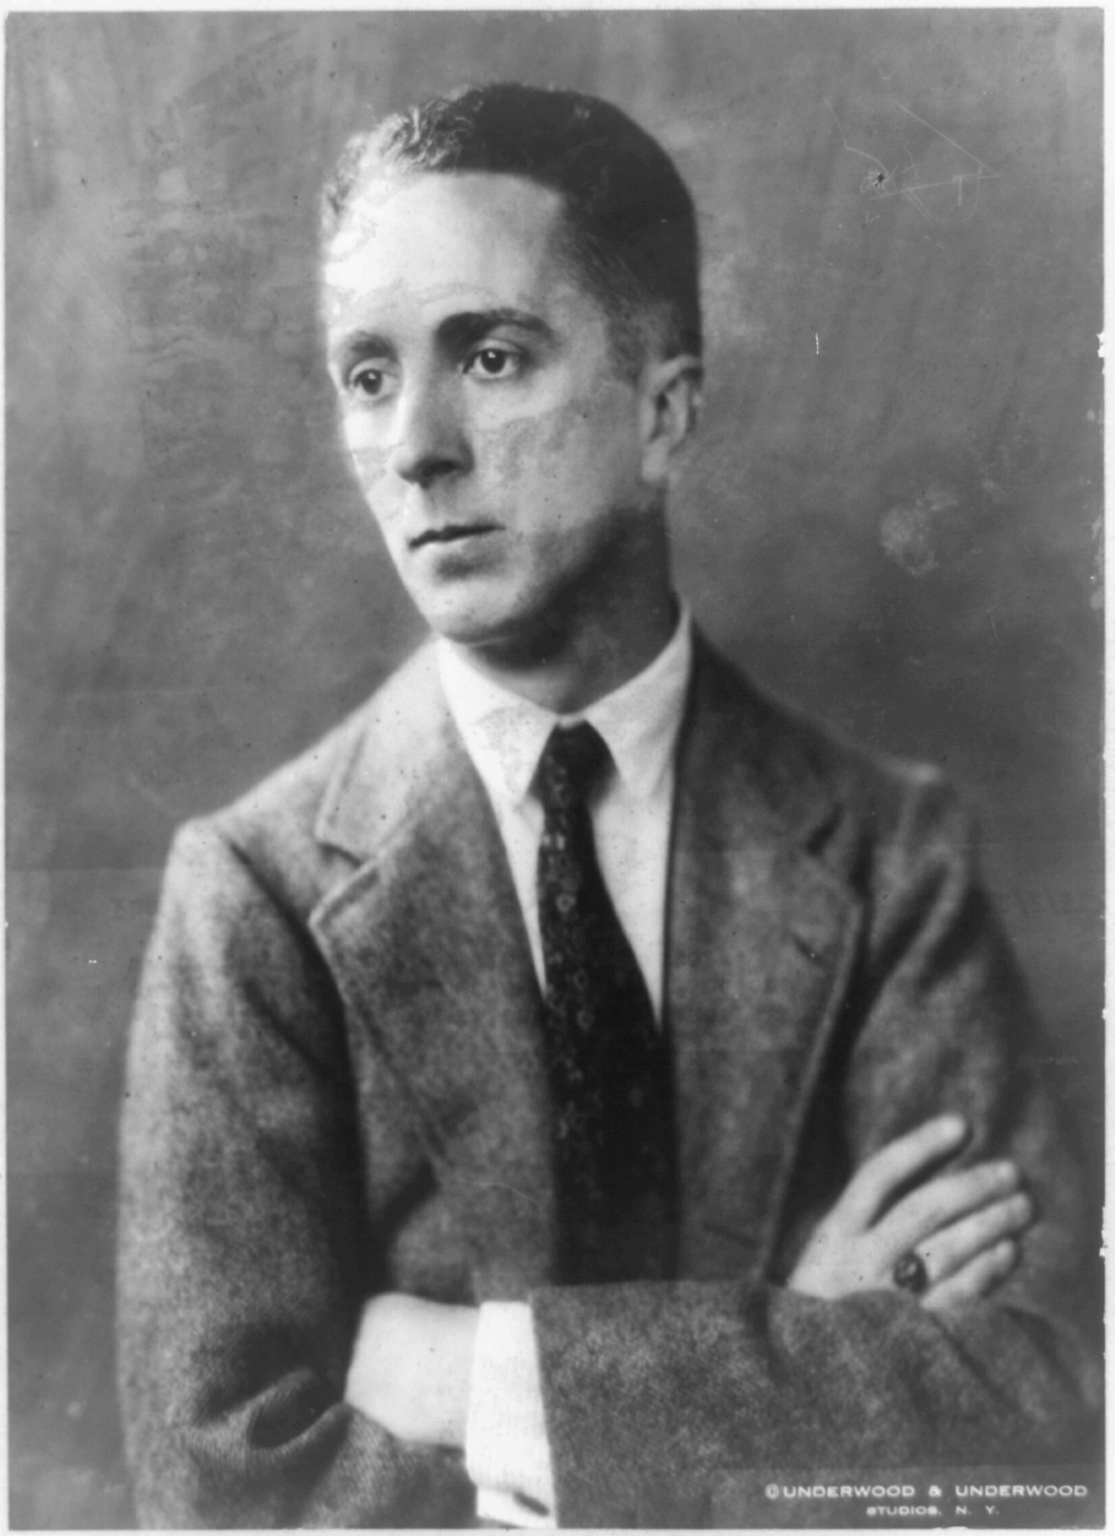 In a vintage photo of artist Norman Rockwell, the man wears a dark jacket with a white dress shirt and dark tie. His arms are crossed at his chest as he looks off to the side.